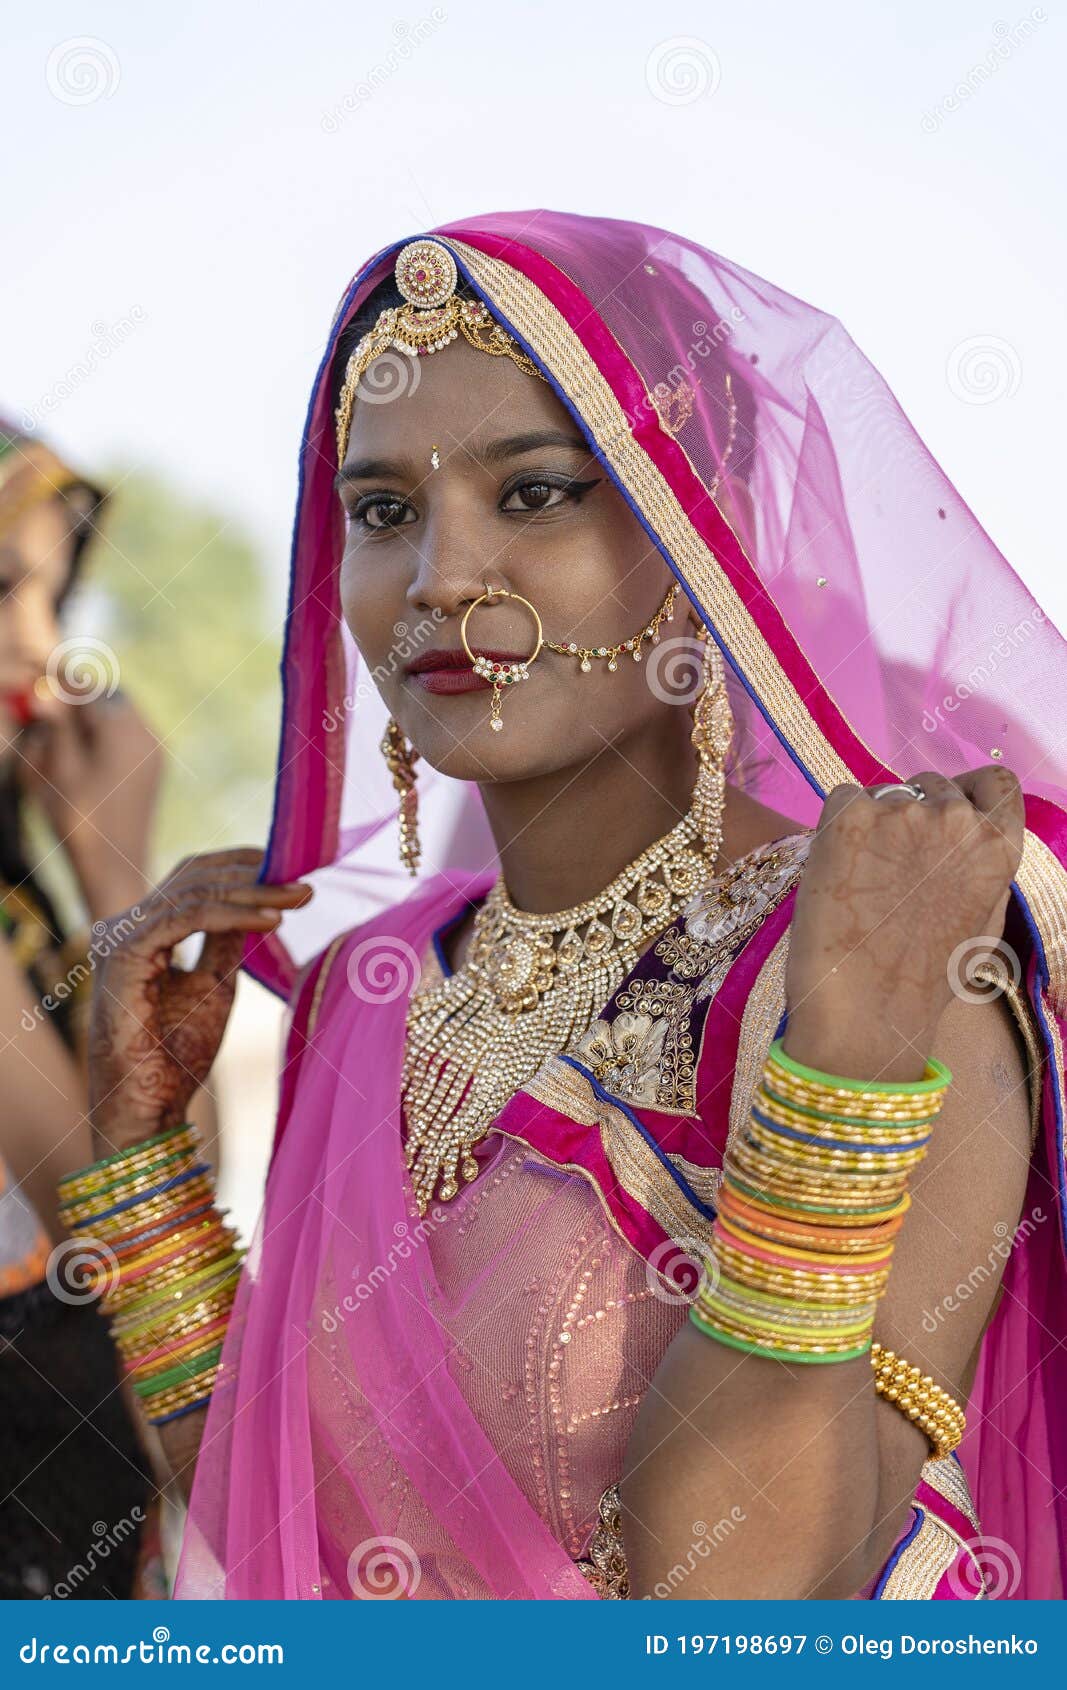 Indian Young Girl on Time Pushkar Camel Mela, Rajasthan, India, Close Up  Portrait Editorial Photography - Image of ethnicity, head: 197198697